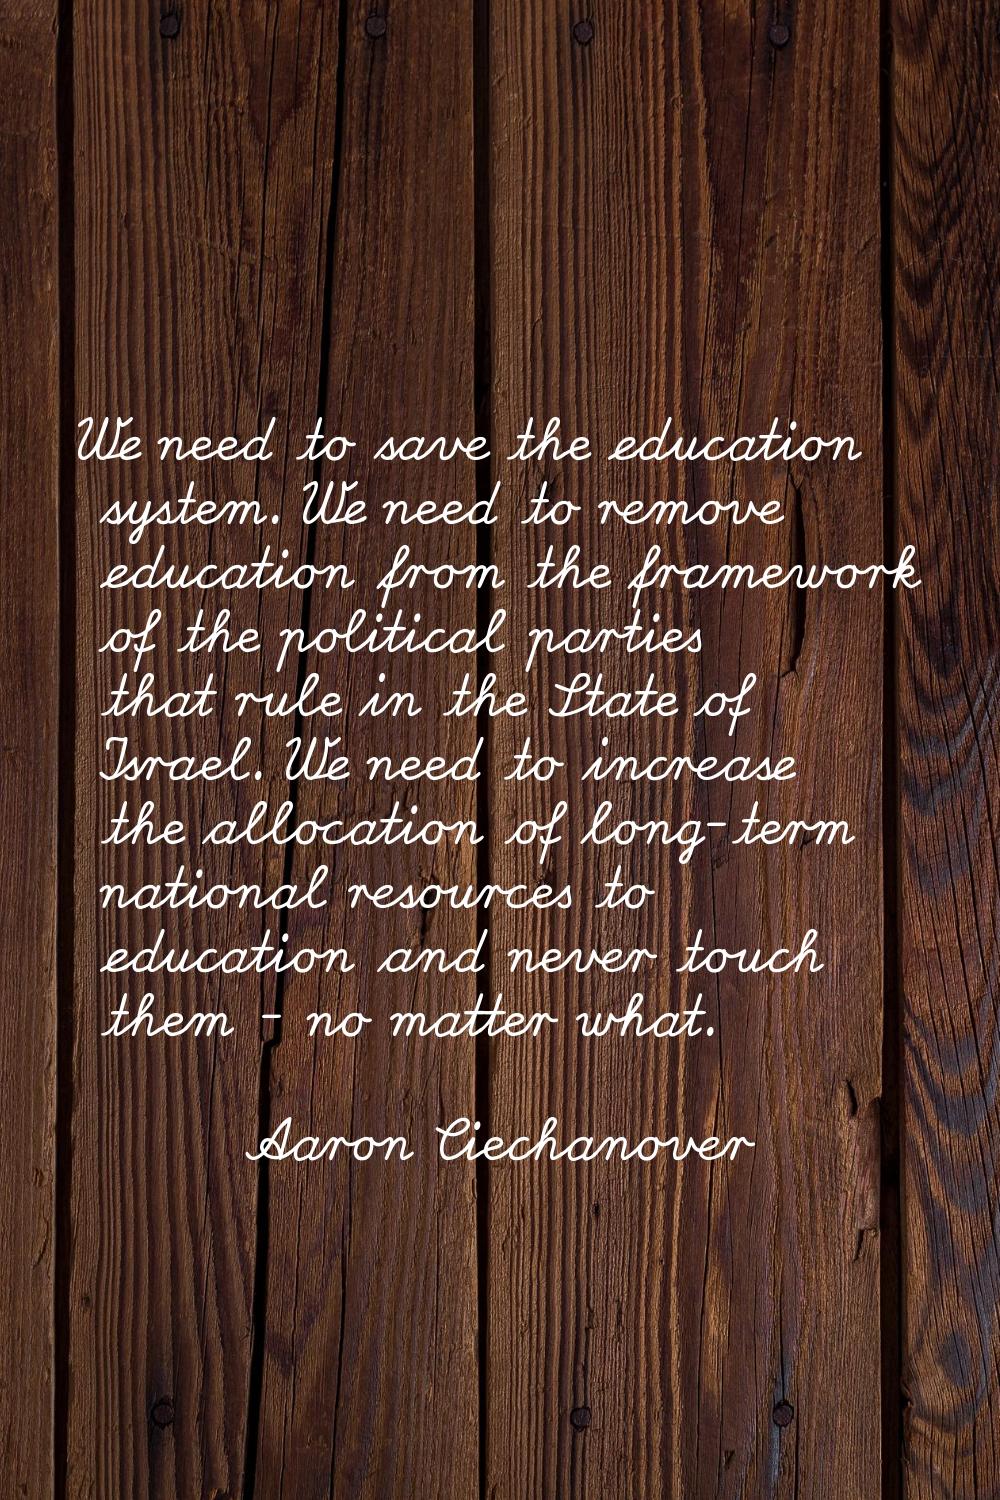 We need to save the education system. We need to remove education from the framework of the politic